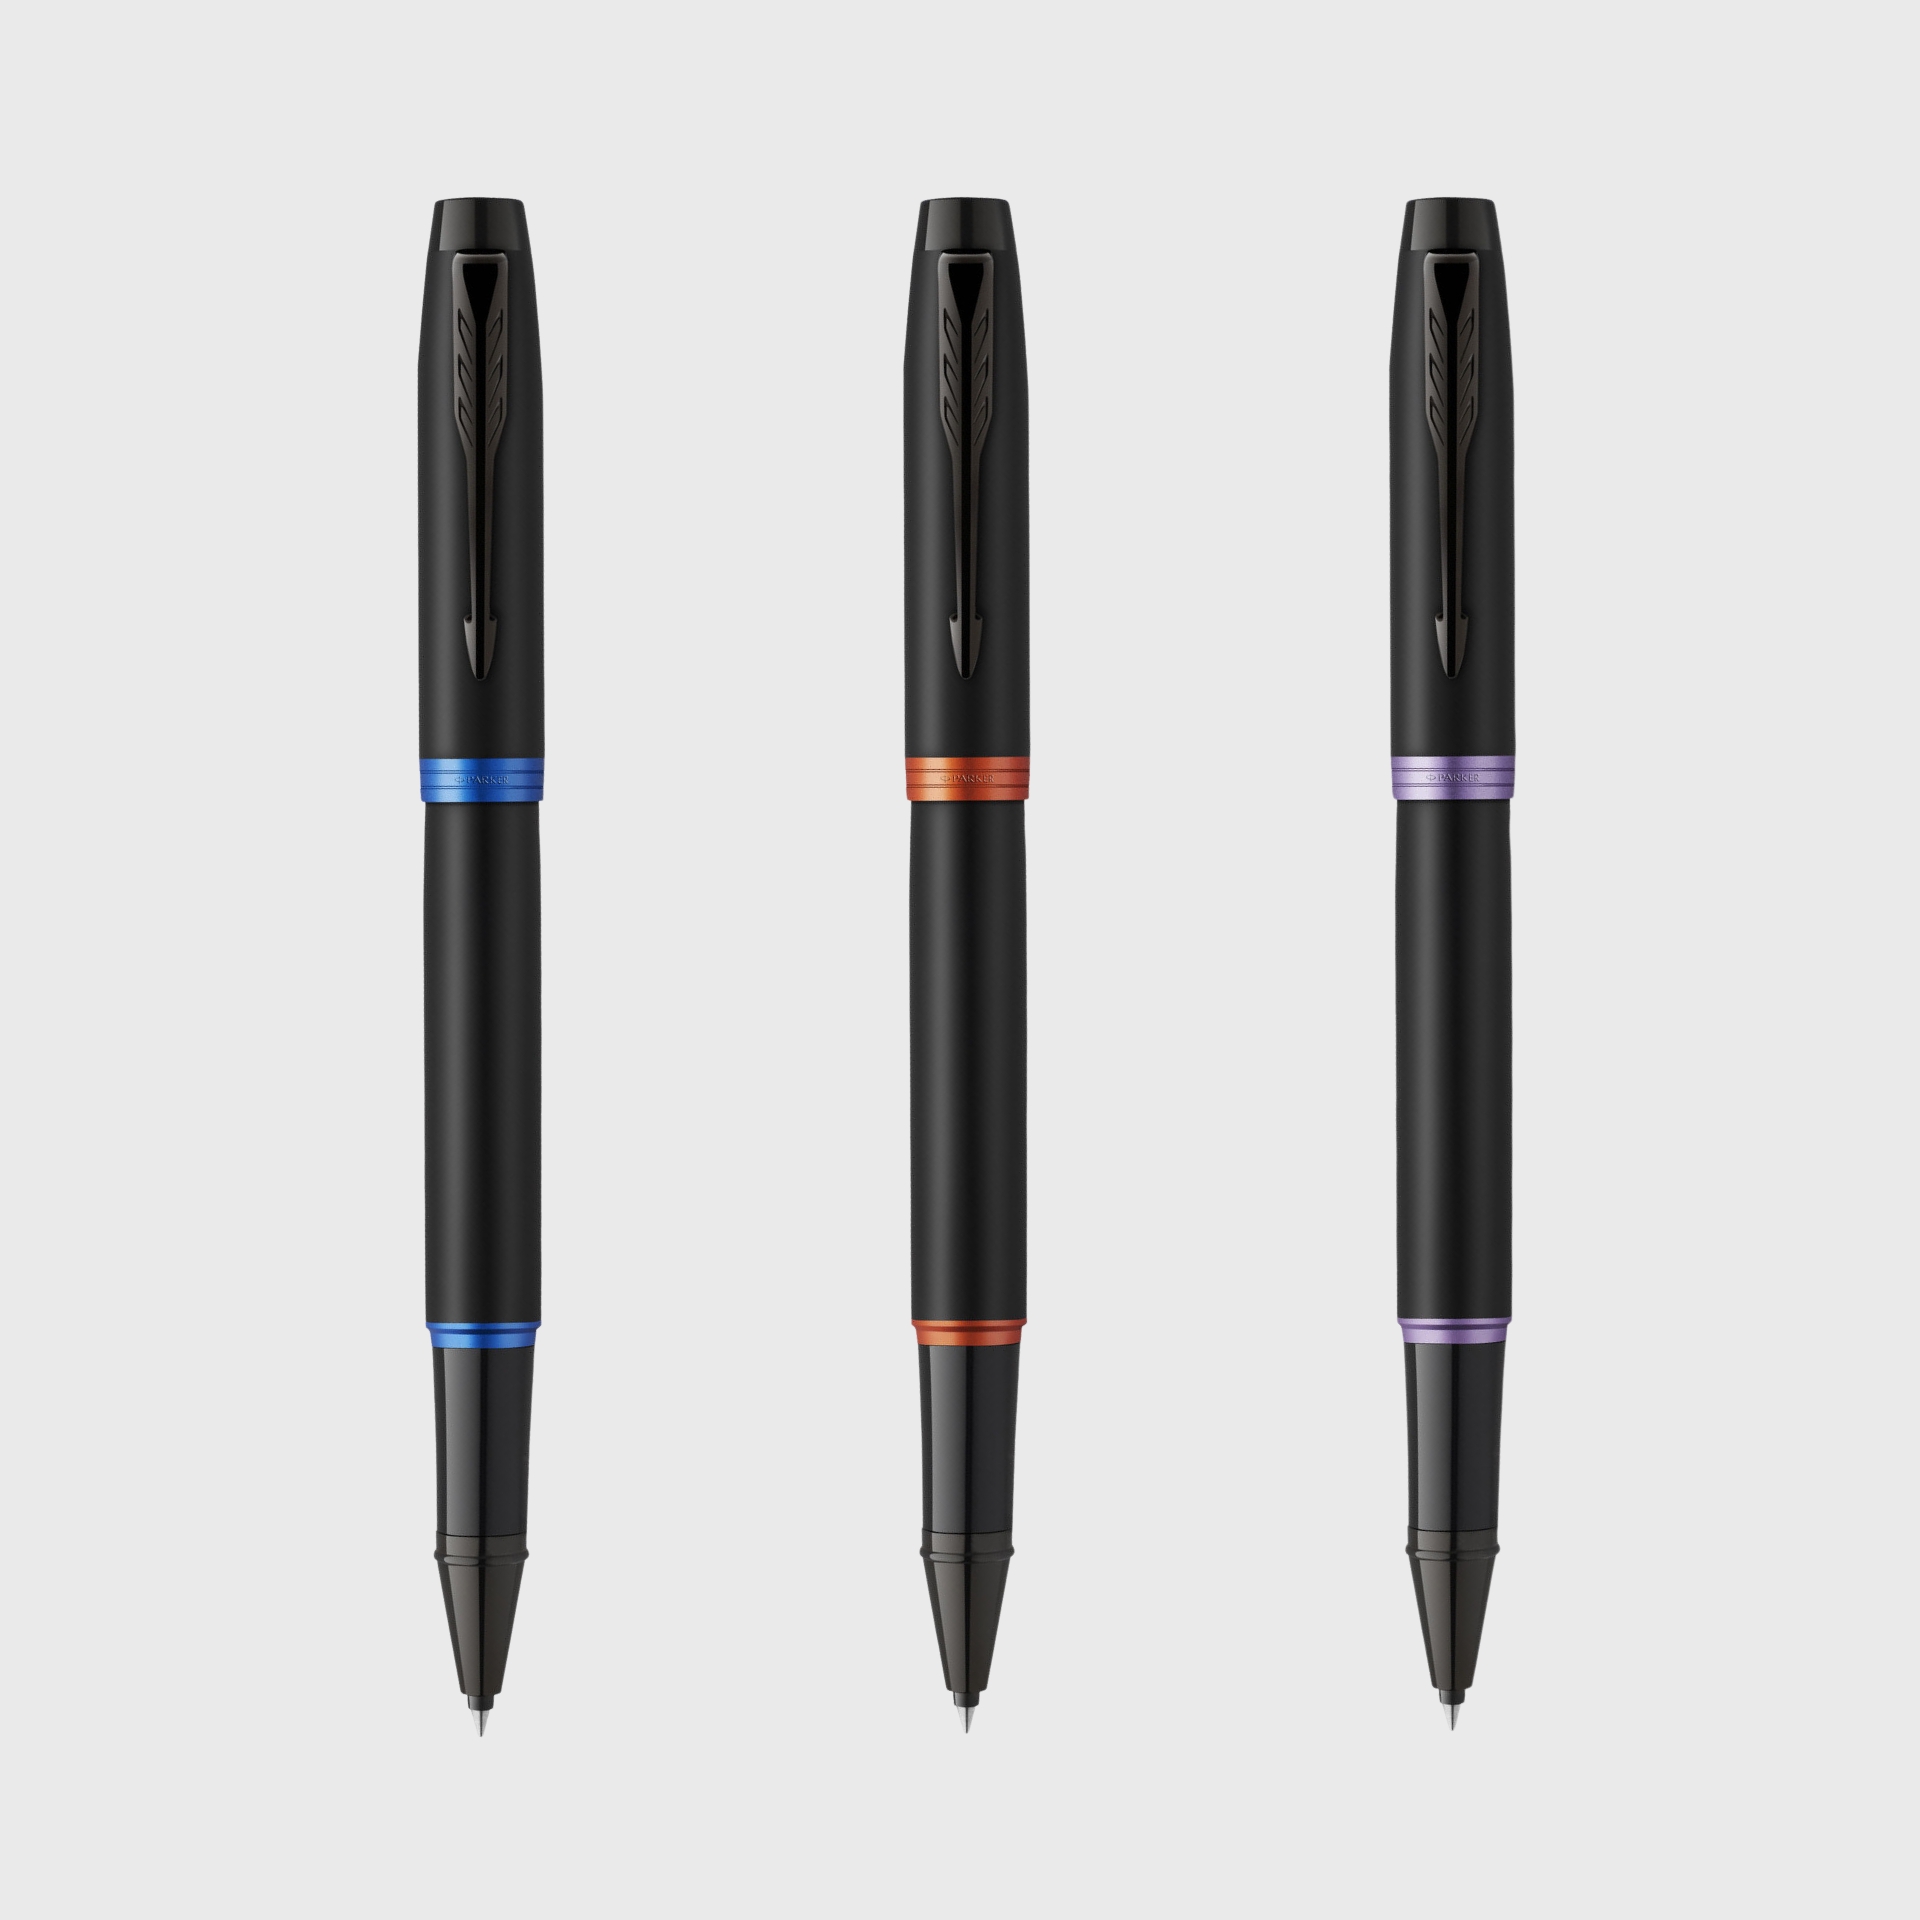 Parker Pen Singapore IM Professionals Vibrant Ring BT - Rollerball Pen Flame Corporate Gifts